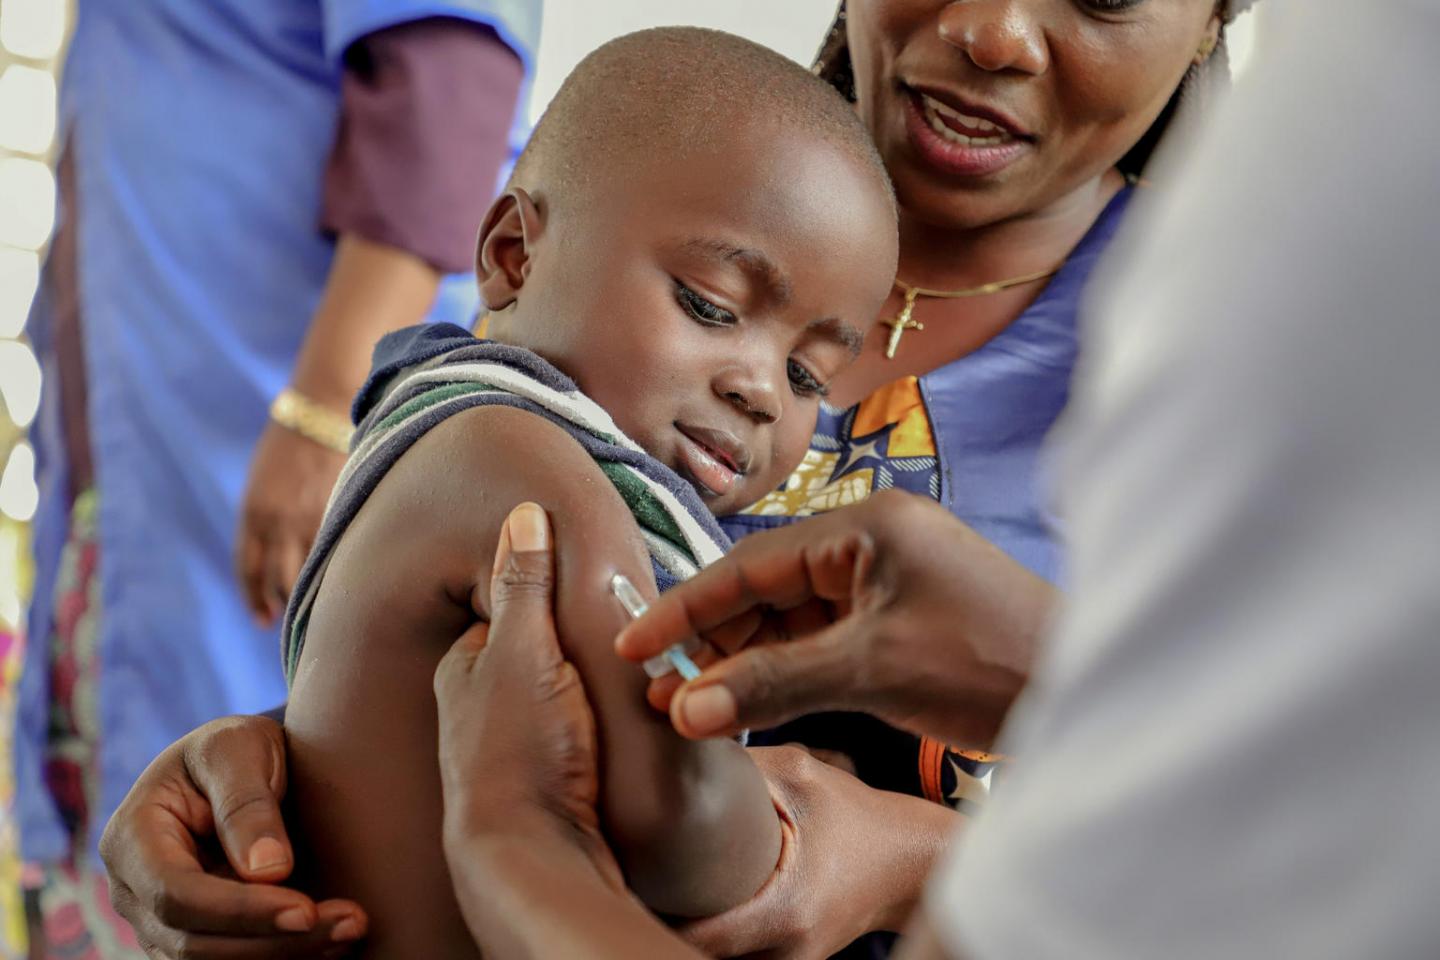 Vaccines are among the greatest advances in global health and development. For over two centuries, vaccines have safely reduced the scourge of diseases like polio, measles and smallpox, helping children grow up healthy and happy. They save more than five lives every minute – preventing up to three million deaths a year, even before the arrival of COVID-19. © UNICEF/UN0287582/Diefaga